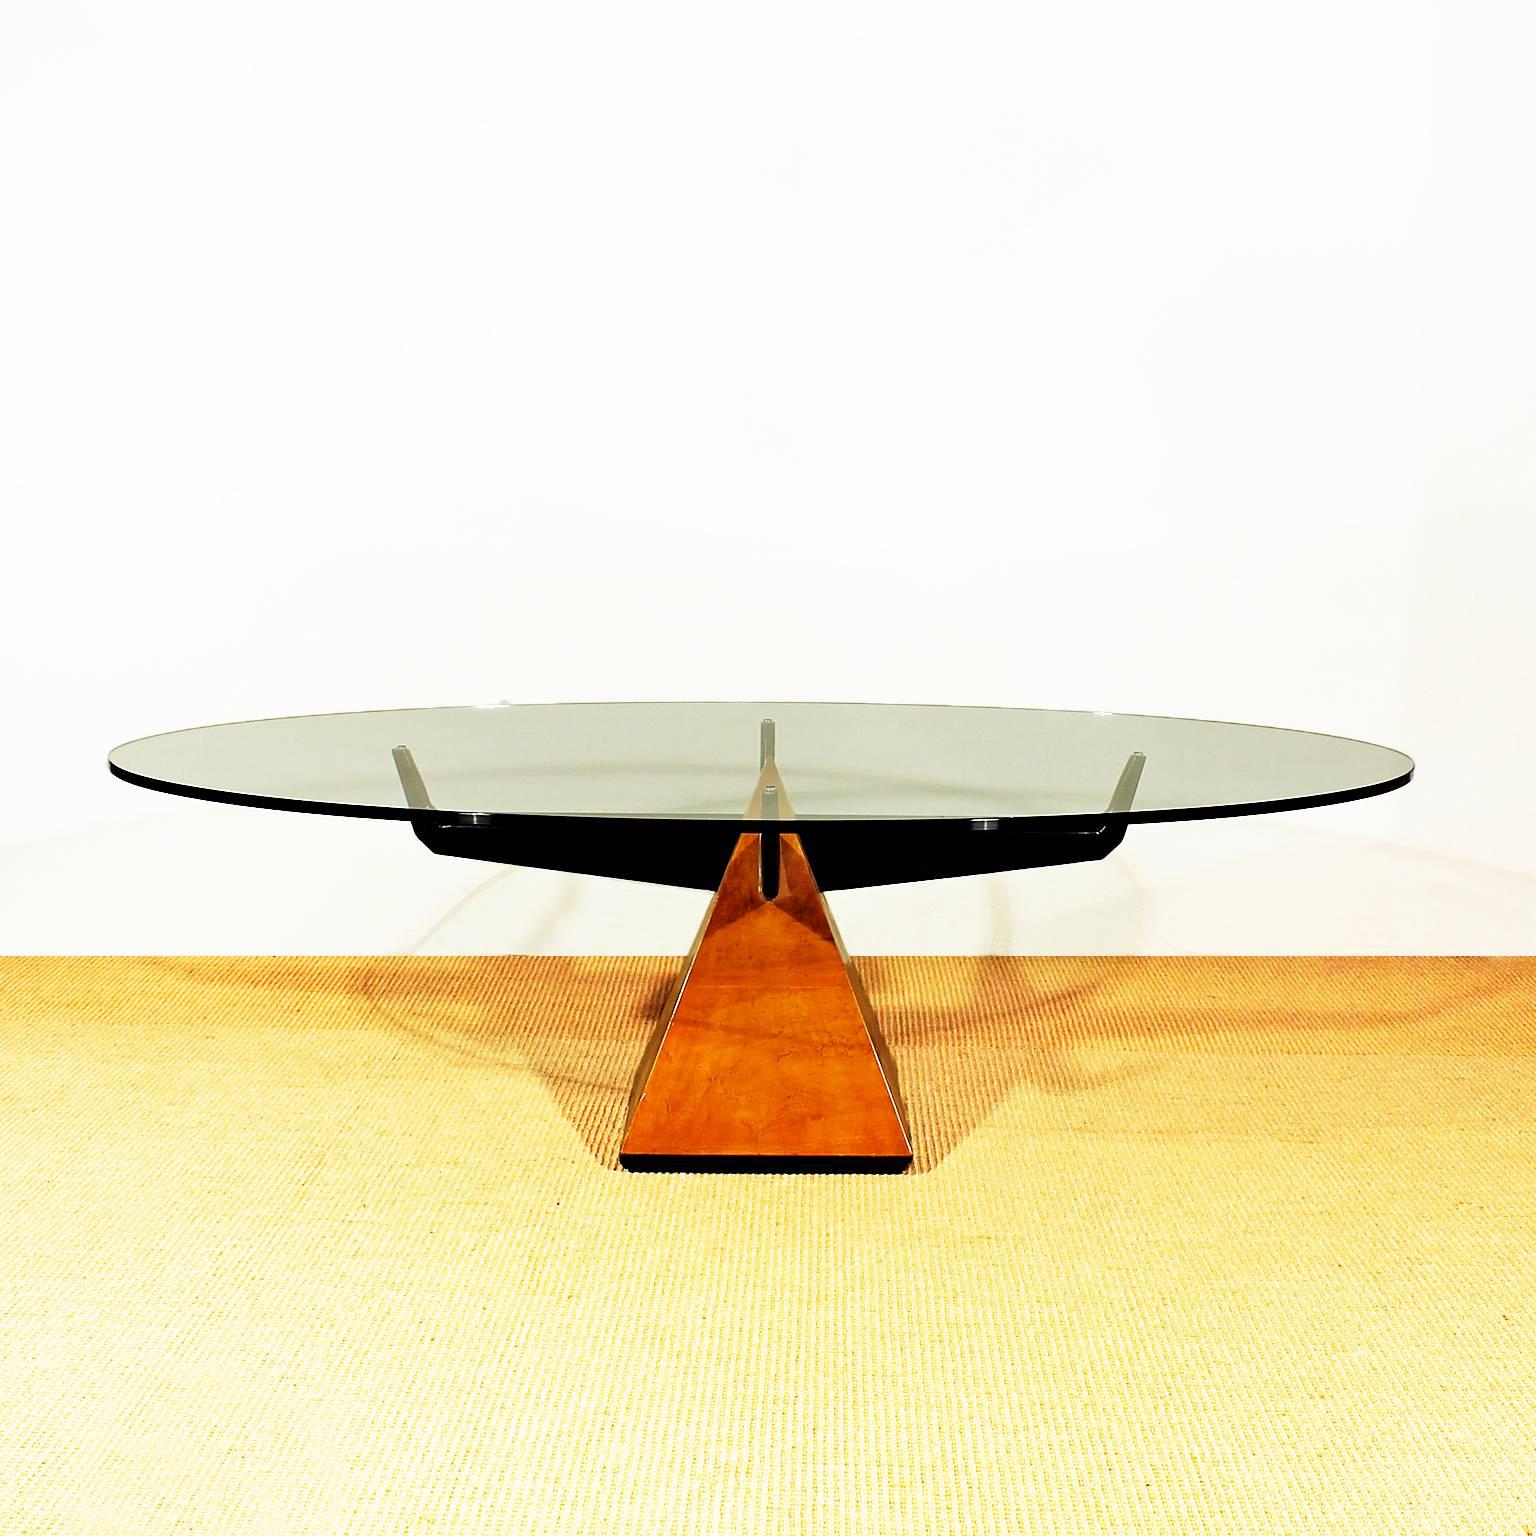 Pyramidal coffee table, solid wood base, maple veneer, French polish, four black lacquered wood arms, thick original oval glass on top.
Italy from the 1950s.